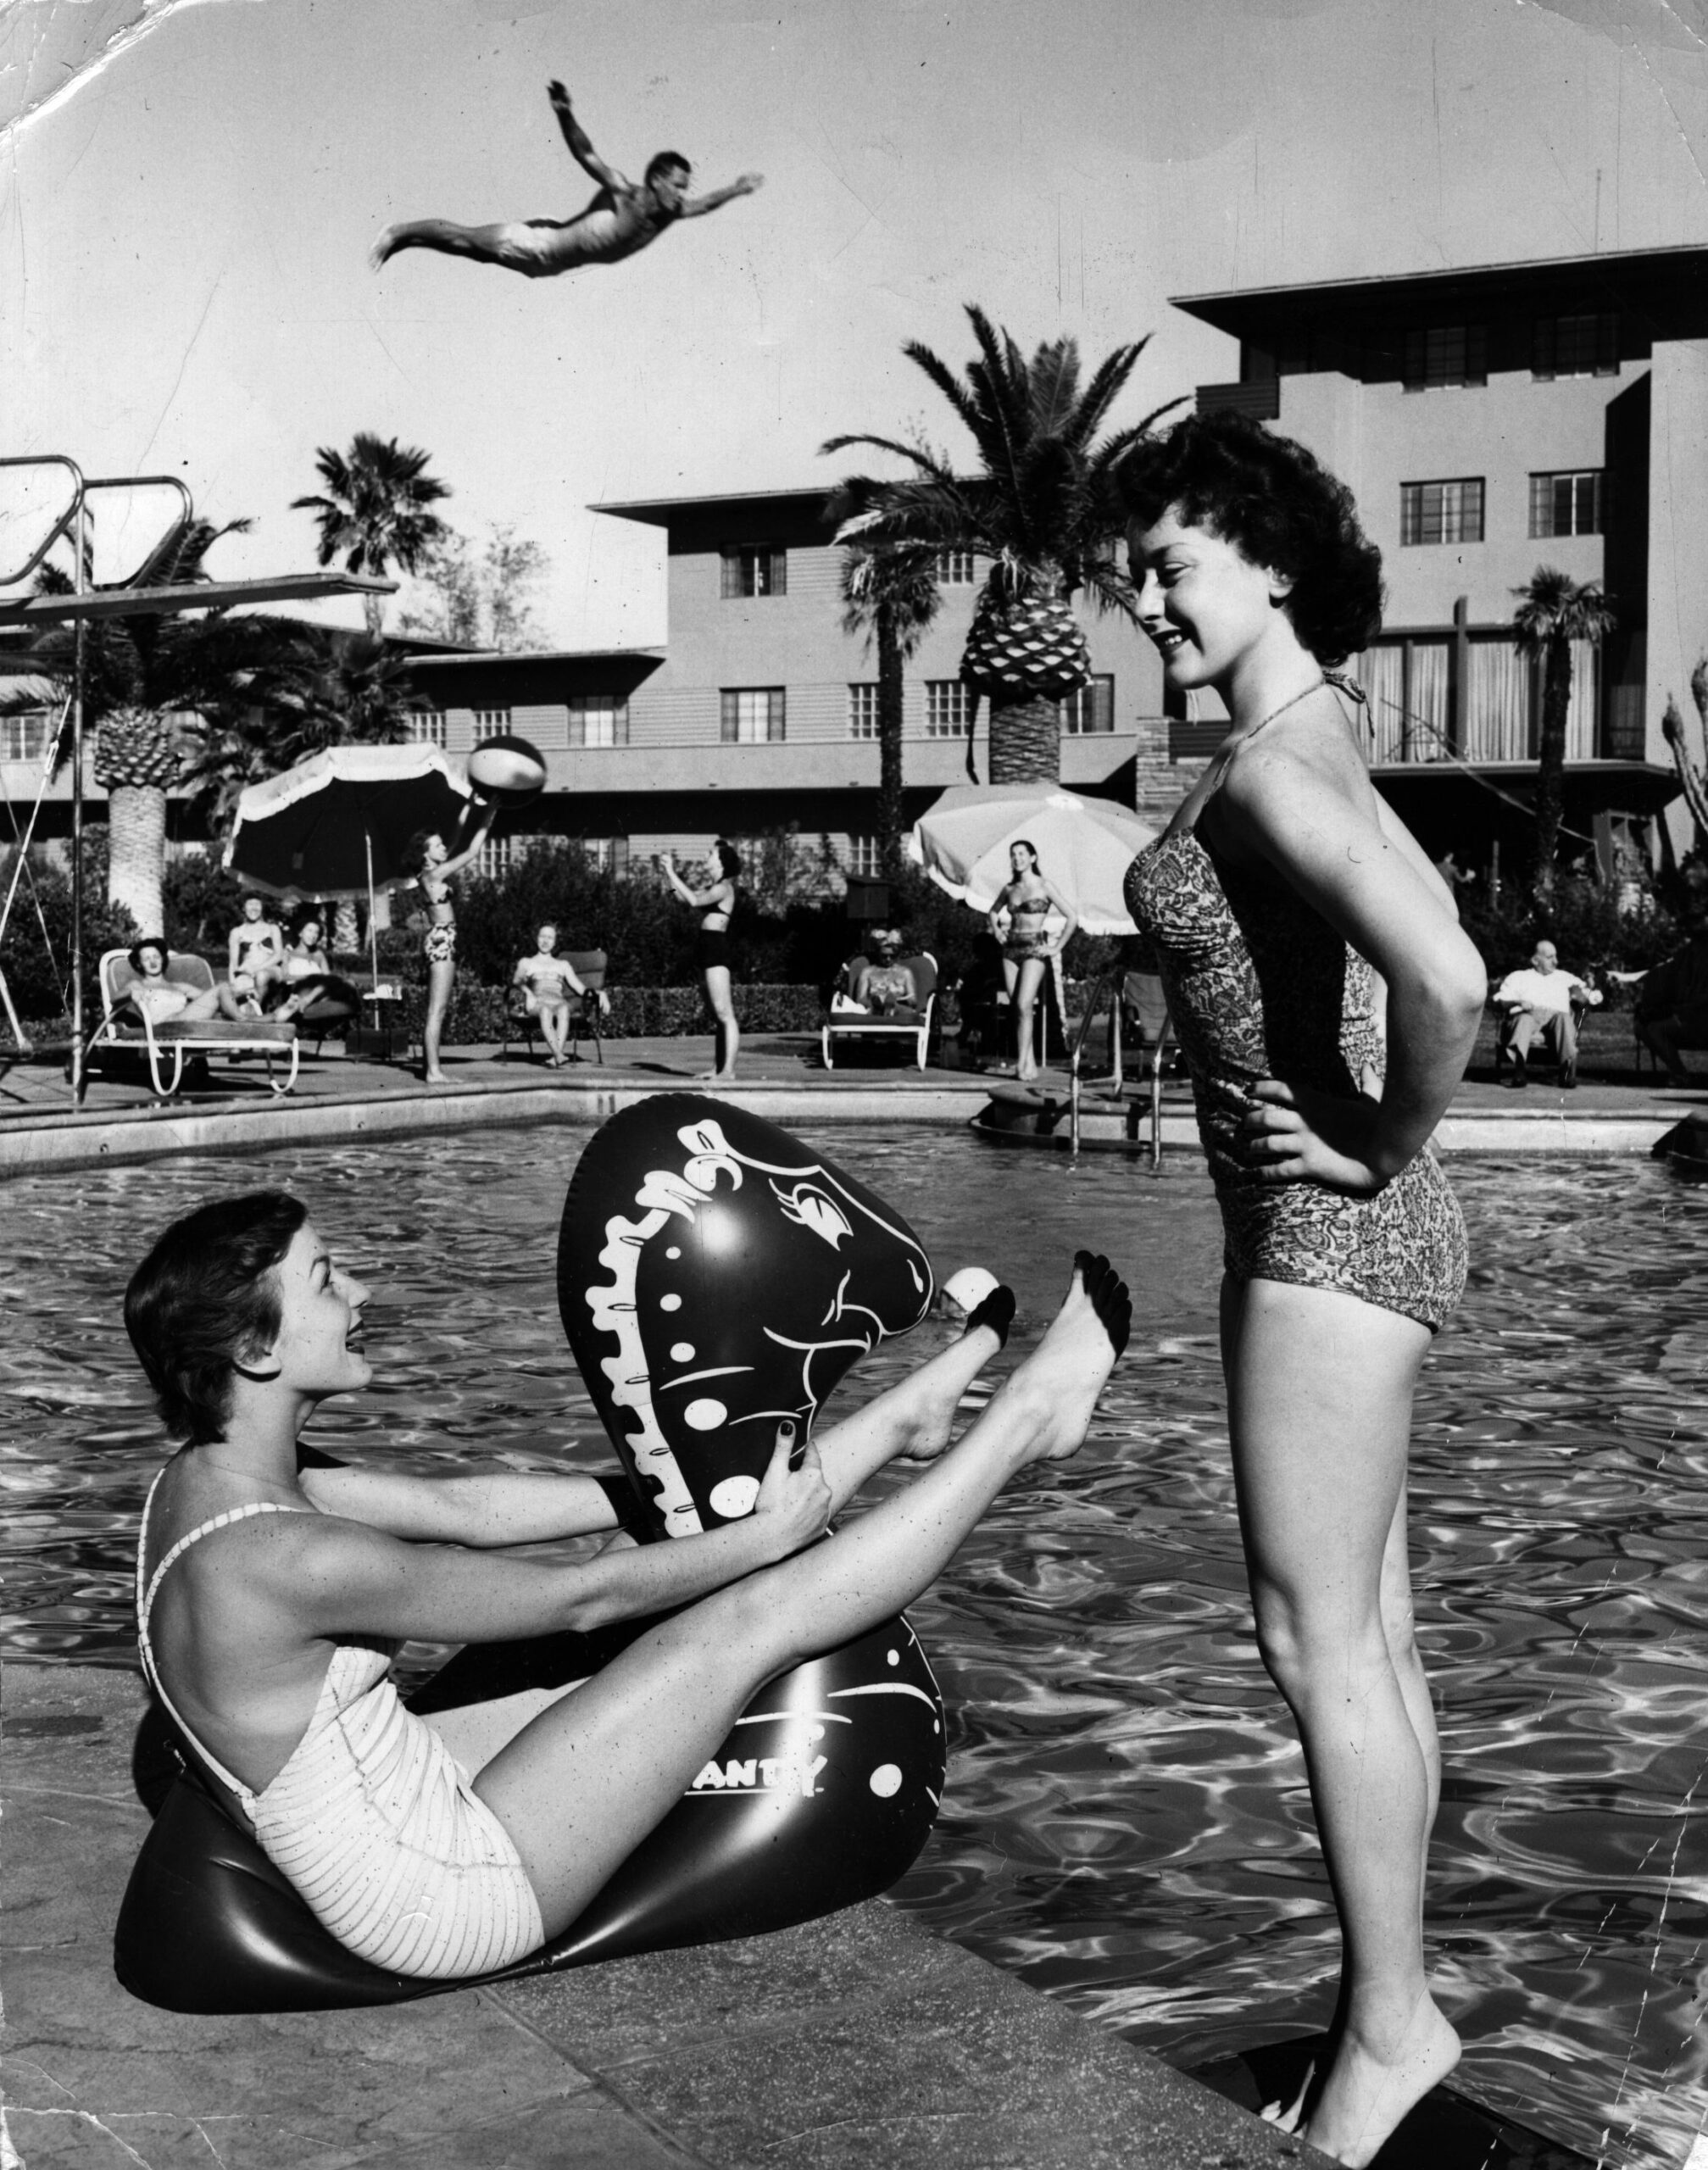 circa 1955: Two young women enjoying themselves by the pool at a Las Vegas holiday resort, while a man performs a spectacularly high dive in the background. (Photo by Keystone/Getty Images)